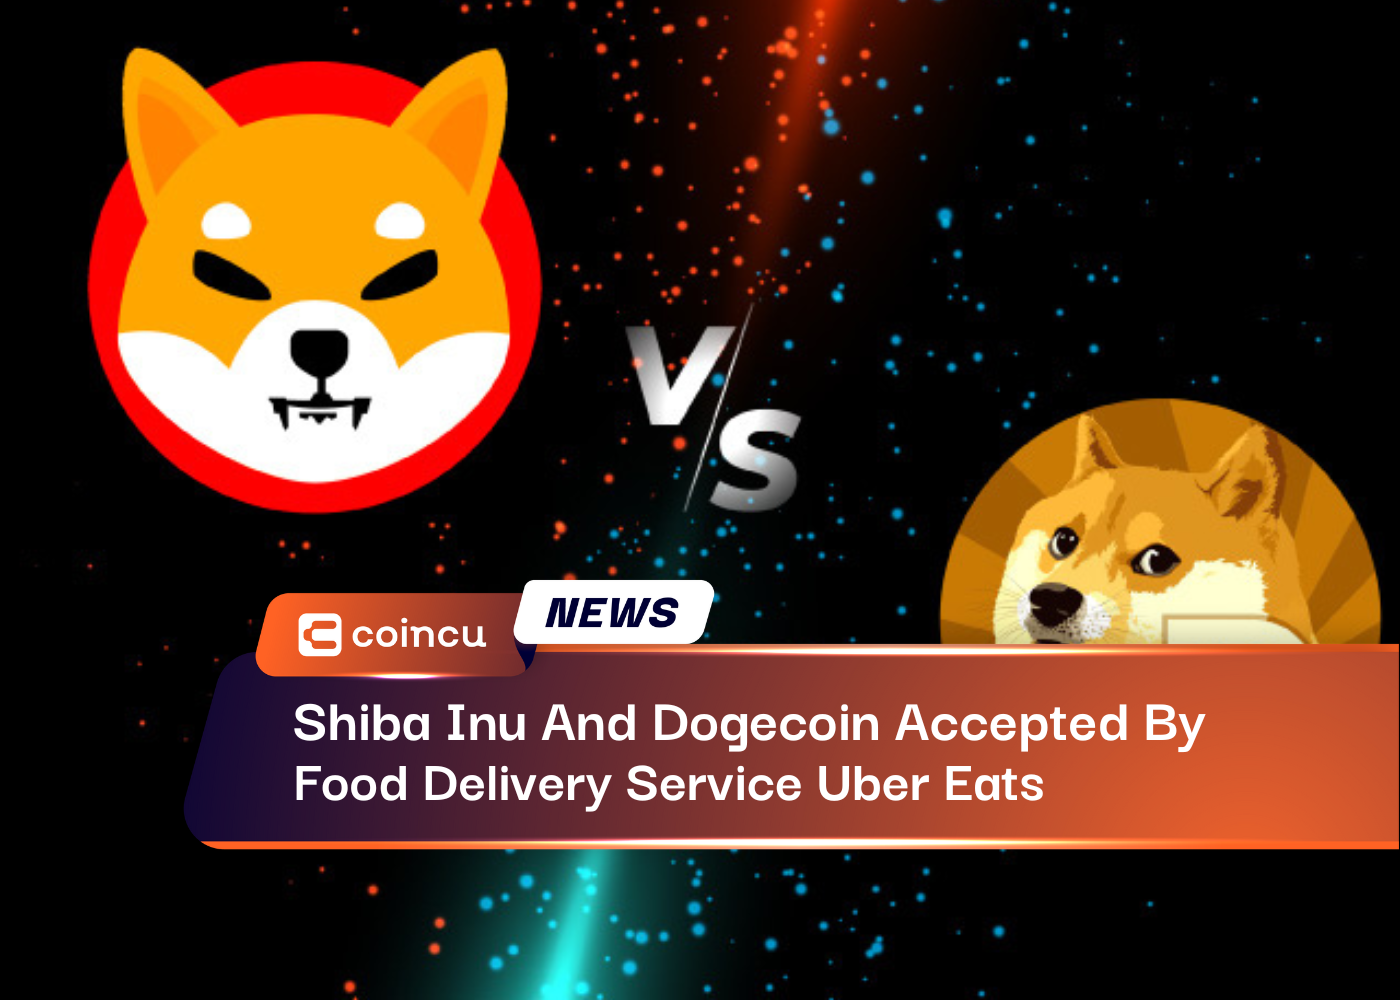 Shiba Inu And Dogecoin Accepted By